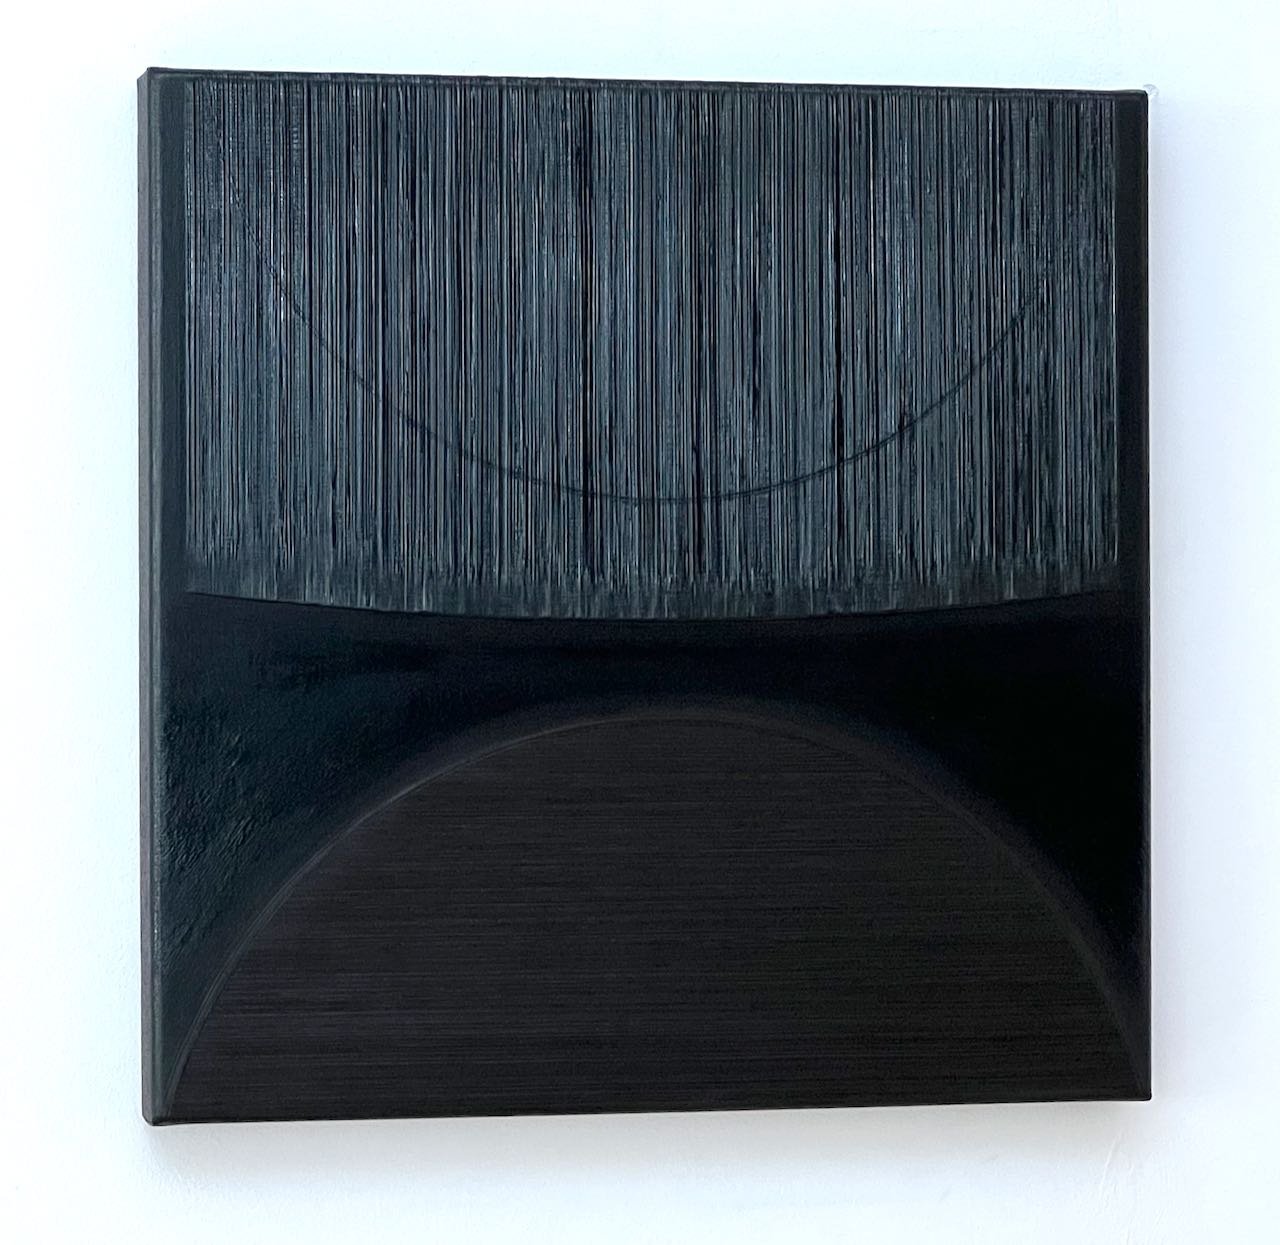 12 Above-metrum [2001-20220115], oil on canvas, 17.75x17.75 in. [45x45cm]_b (Copy)